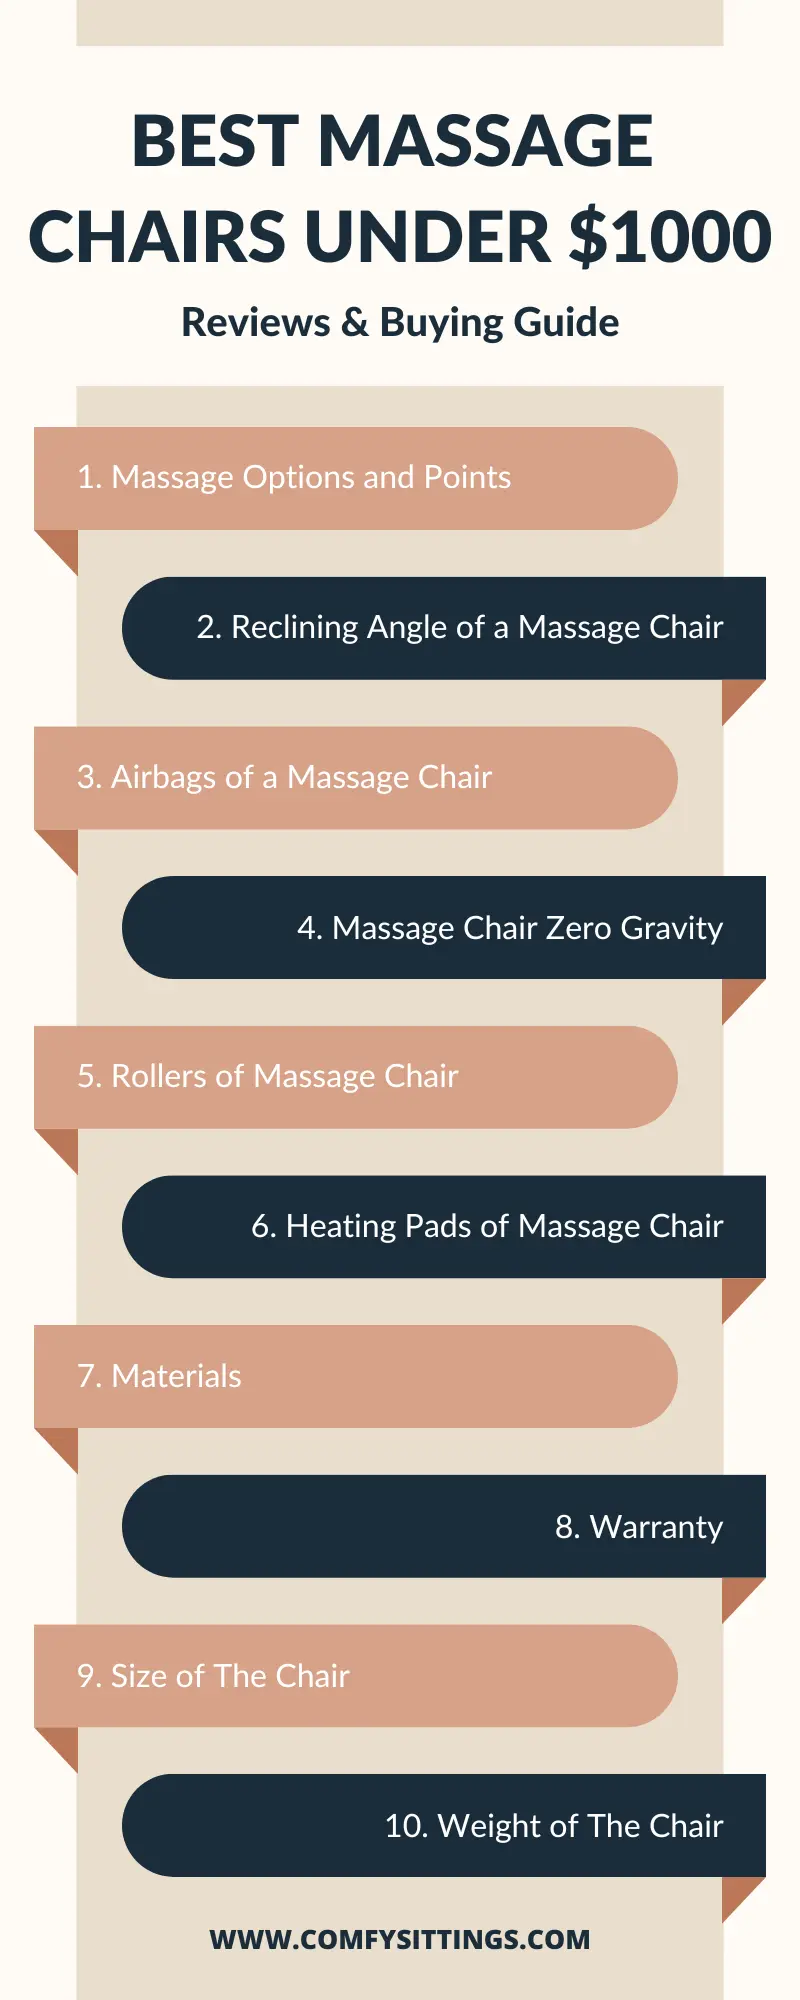 Guide To Pick The Right Massage Chair Under $1000